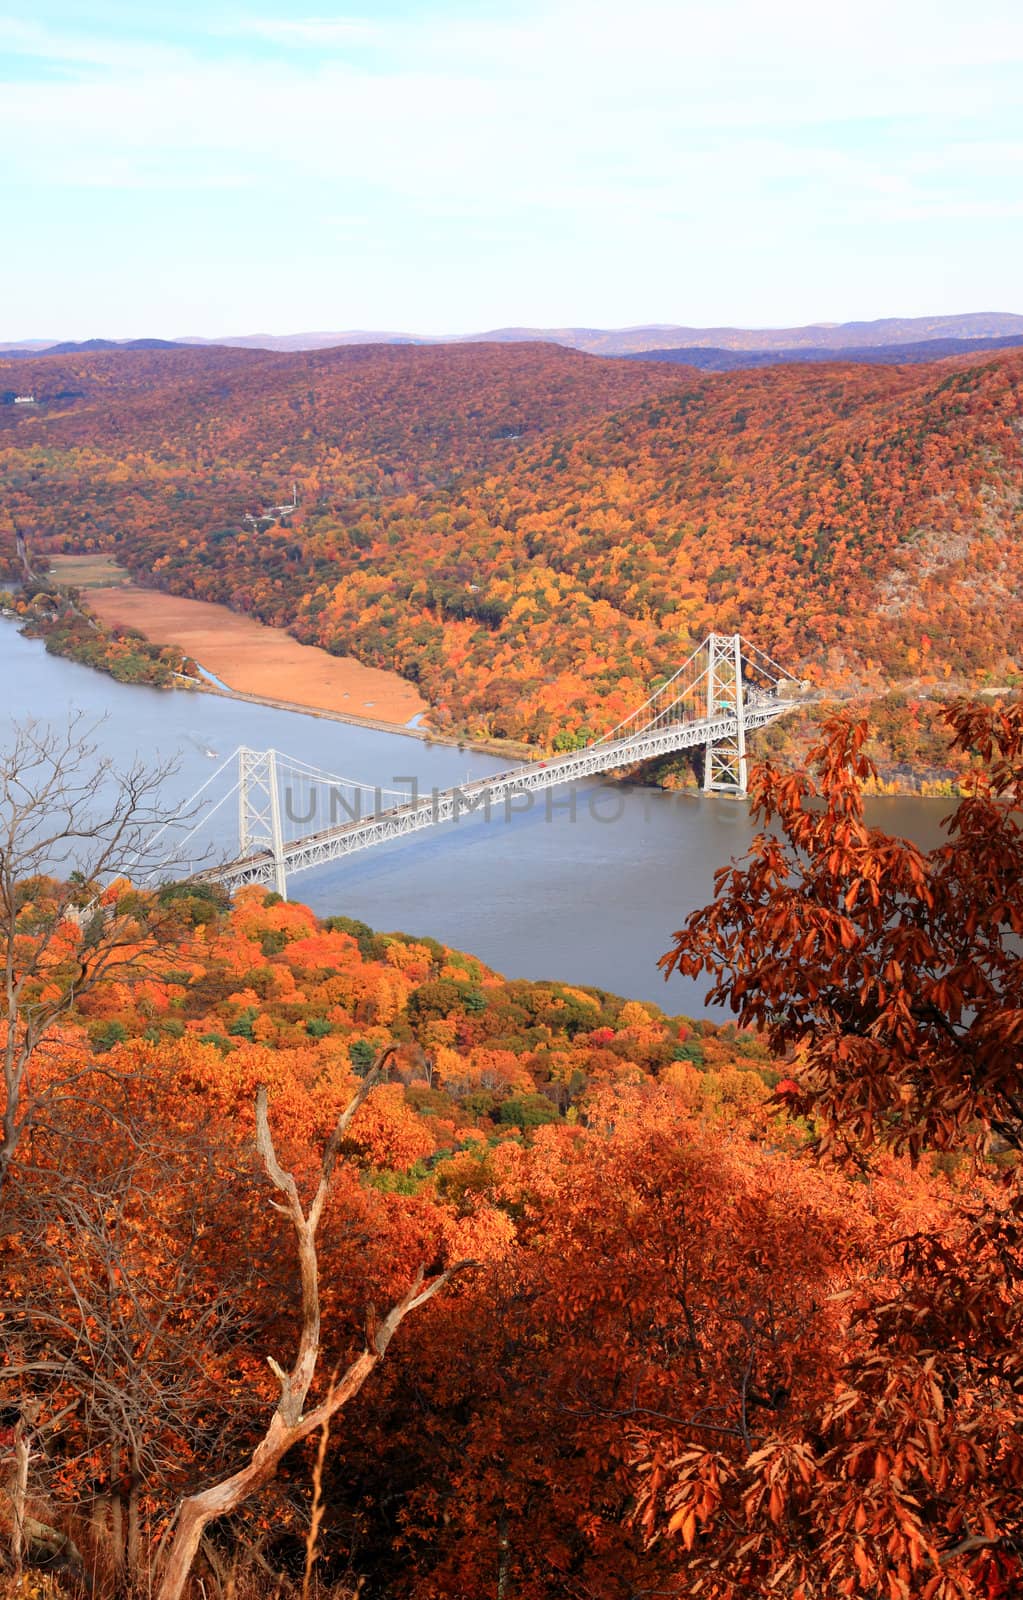 The foliage scenery at Hudson River region in New York State